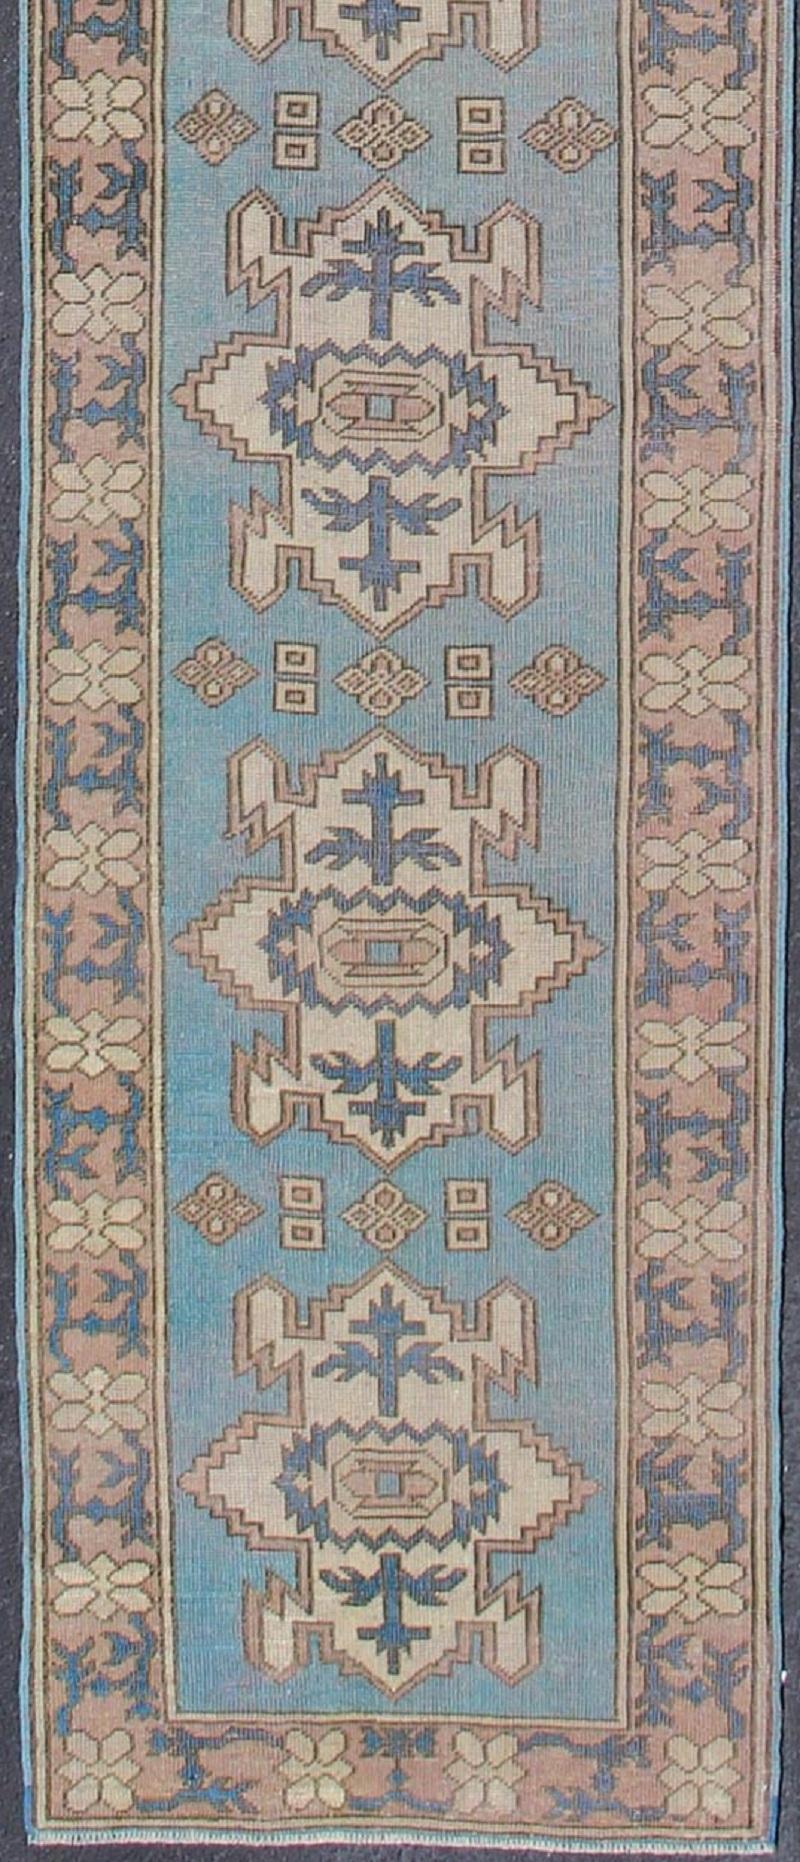 Long vintage Turkish runner with geometric design in light blue and taupe
Vintage Oushak runner from Turkey with Medallion design in various color tones, rug en-176085, country of origin / type: Turkey / Oushak, circa 1930

This vintage Turkish